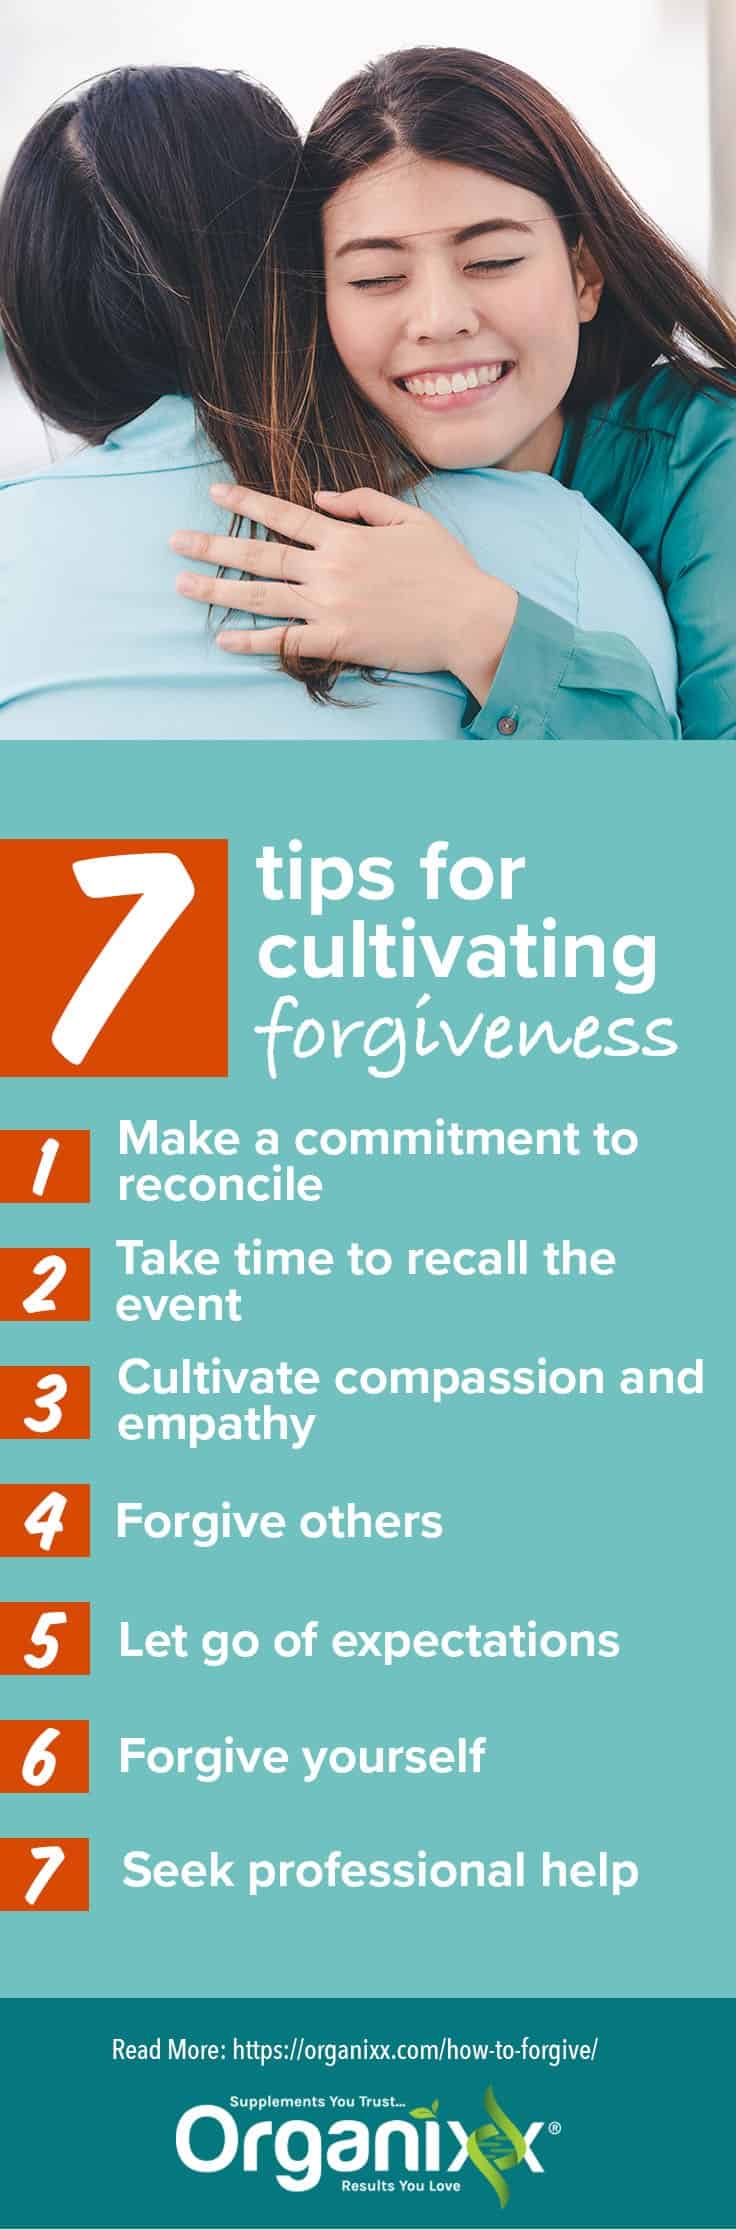 cultivating forgiveness infographic